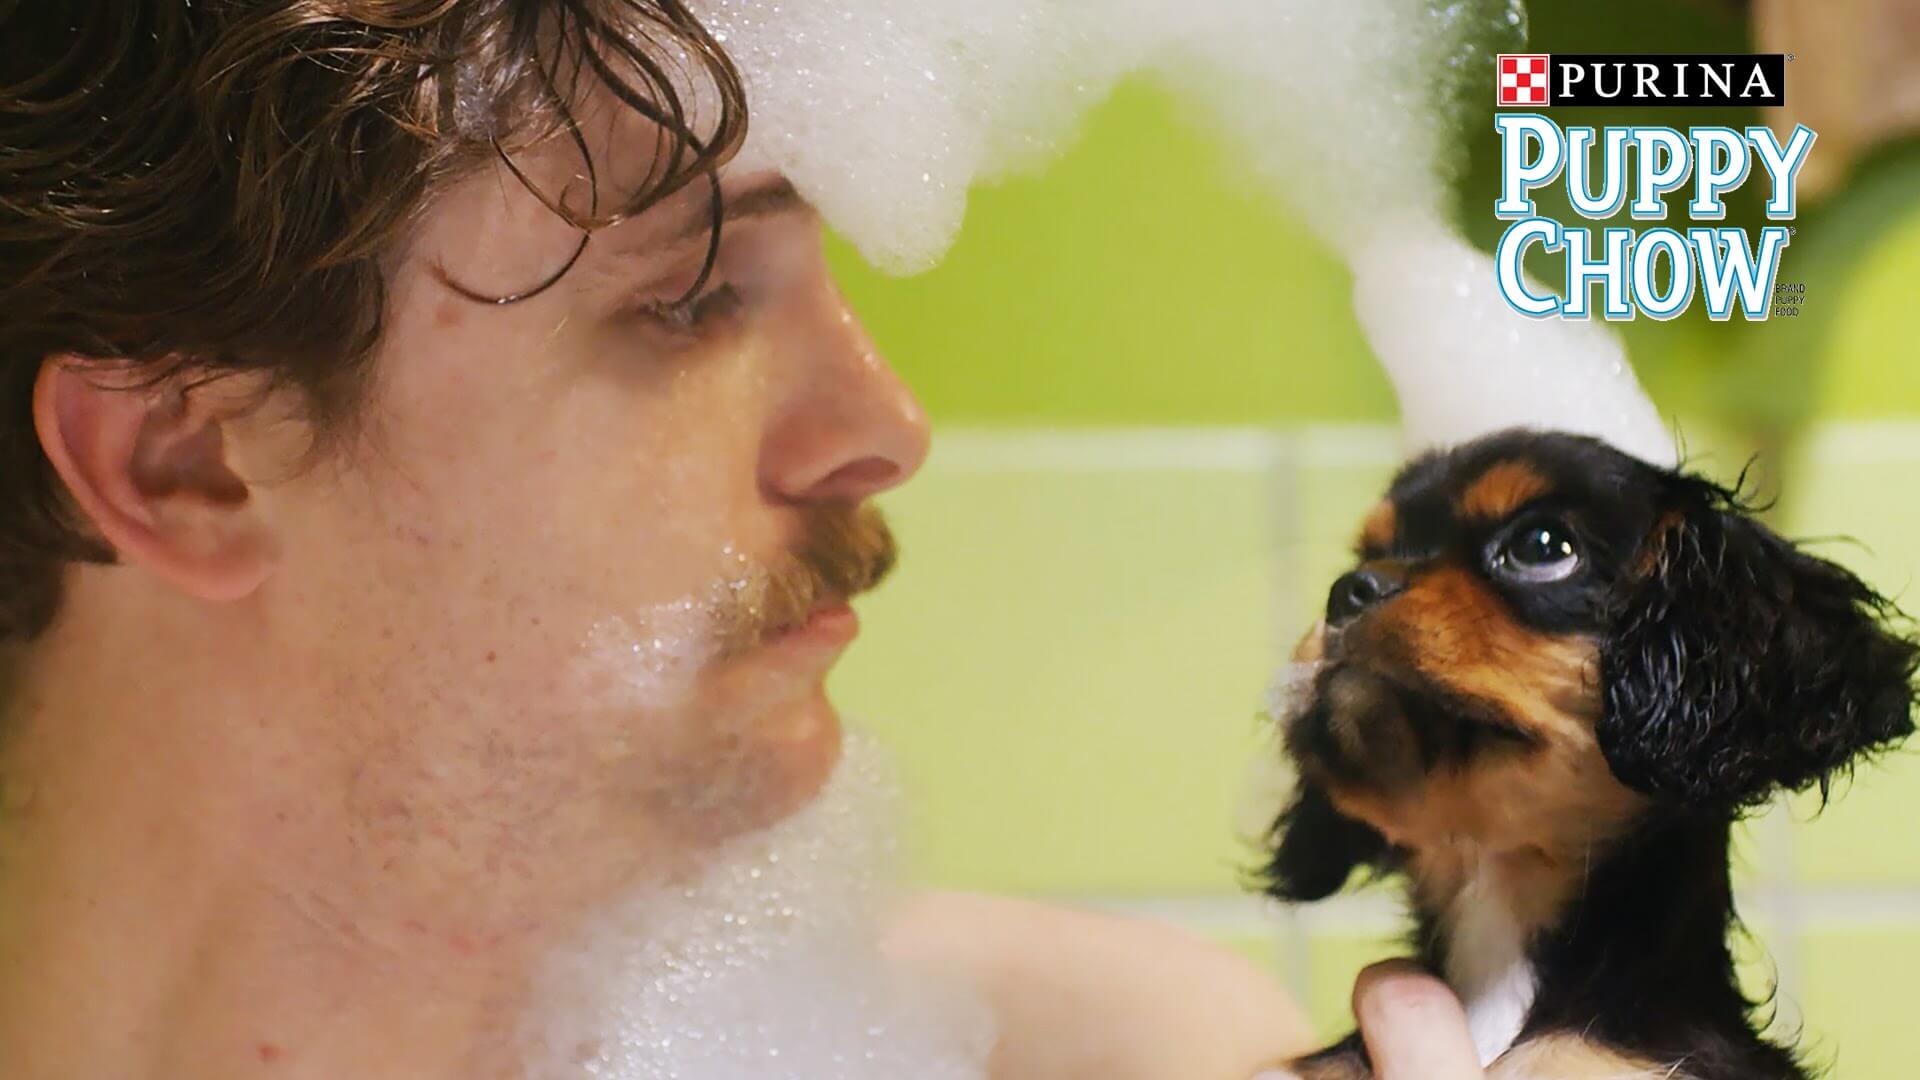 Cute and Entertaining Video About Love, Dogs, Relationships Love It